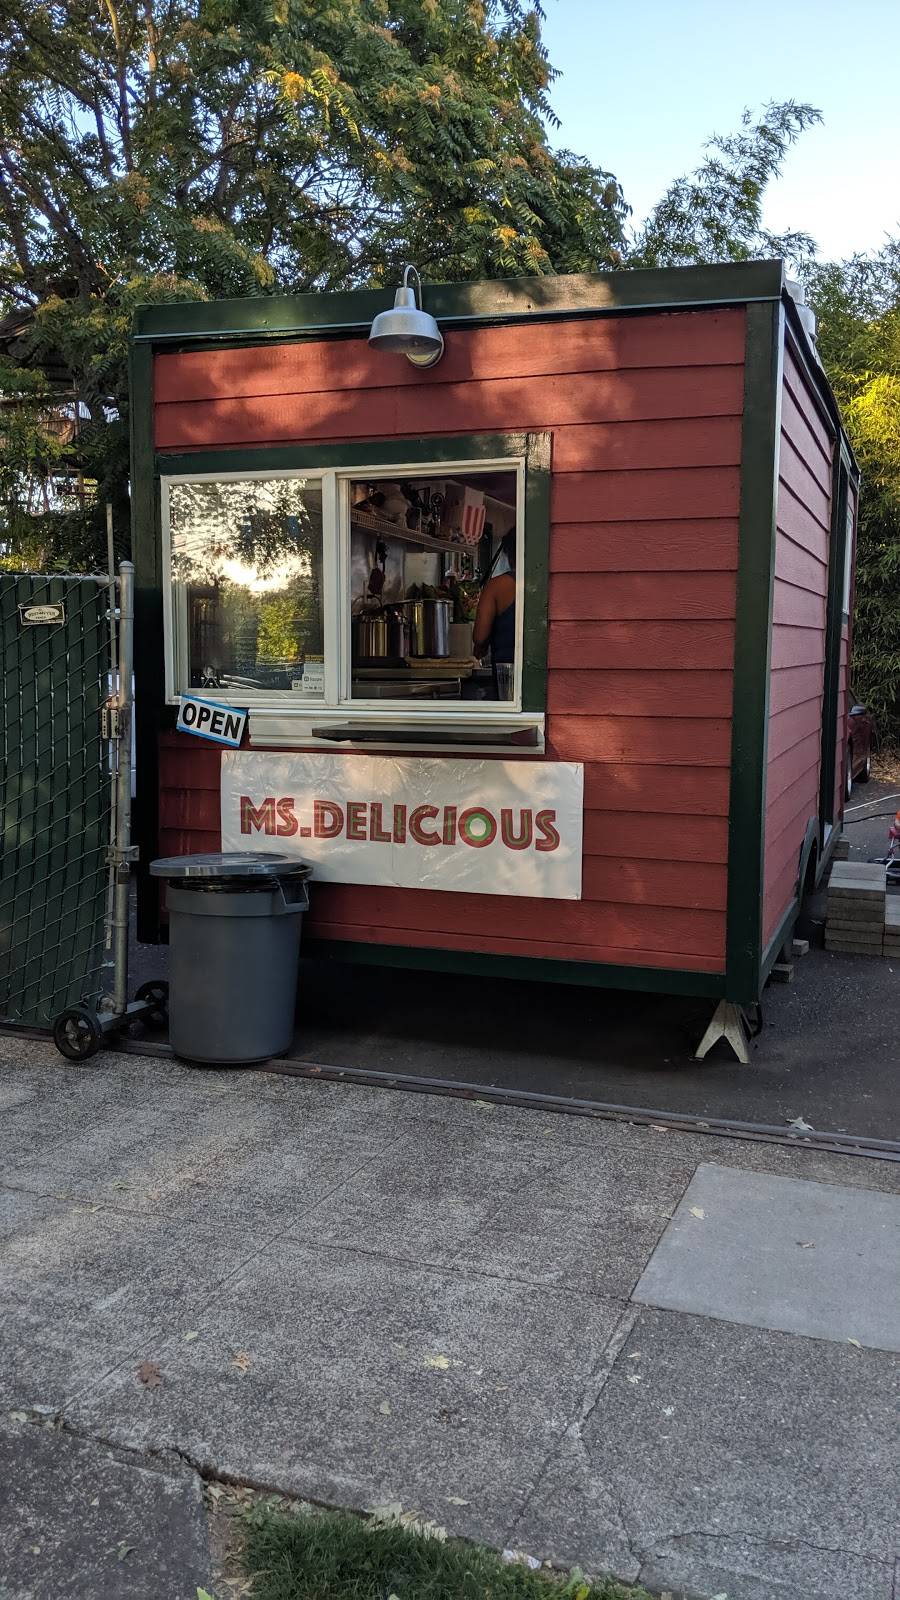 Ms. Delicious | restaurant | 8310 N Brandon Ave, Portland, OR 97217, USA | 5039579809 OR +1 503-957-9809